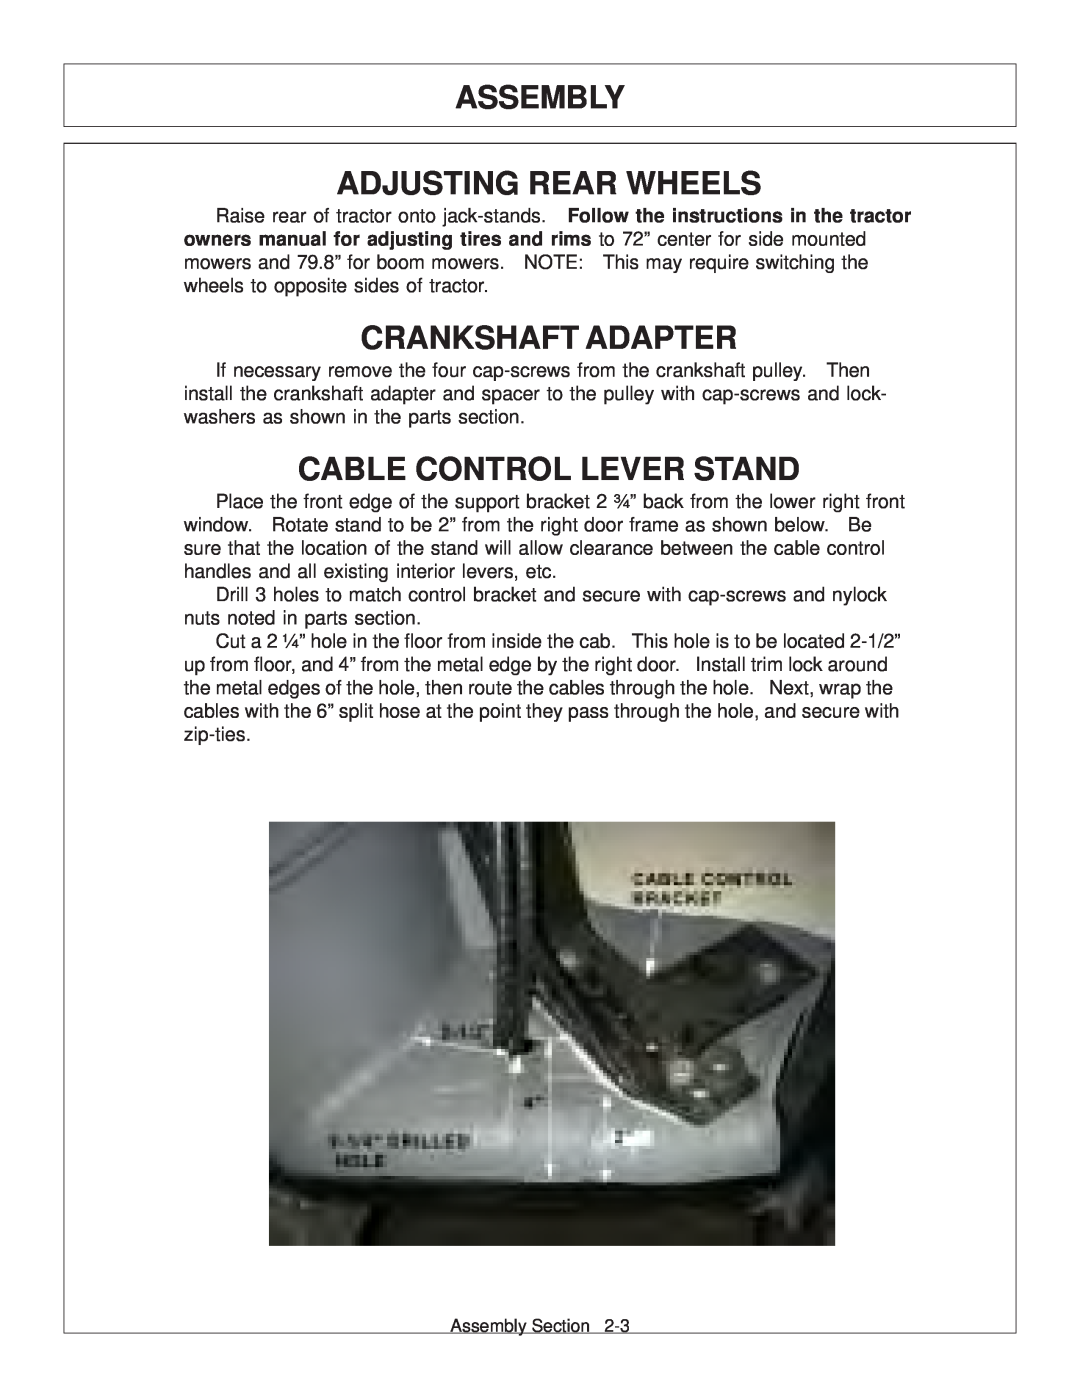 Tiger Products Co., Ltd 6020009 manual Assembly Adjusting Rear Wheels, Crankshaft Adapter, Cable Control Lever Stand 